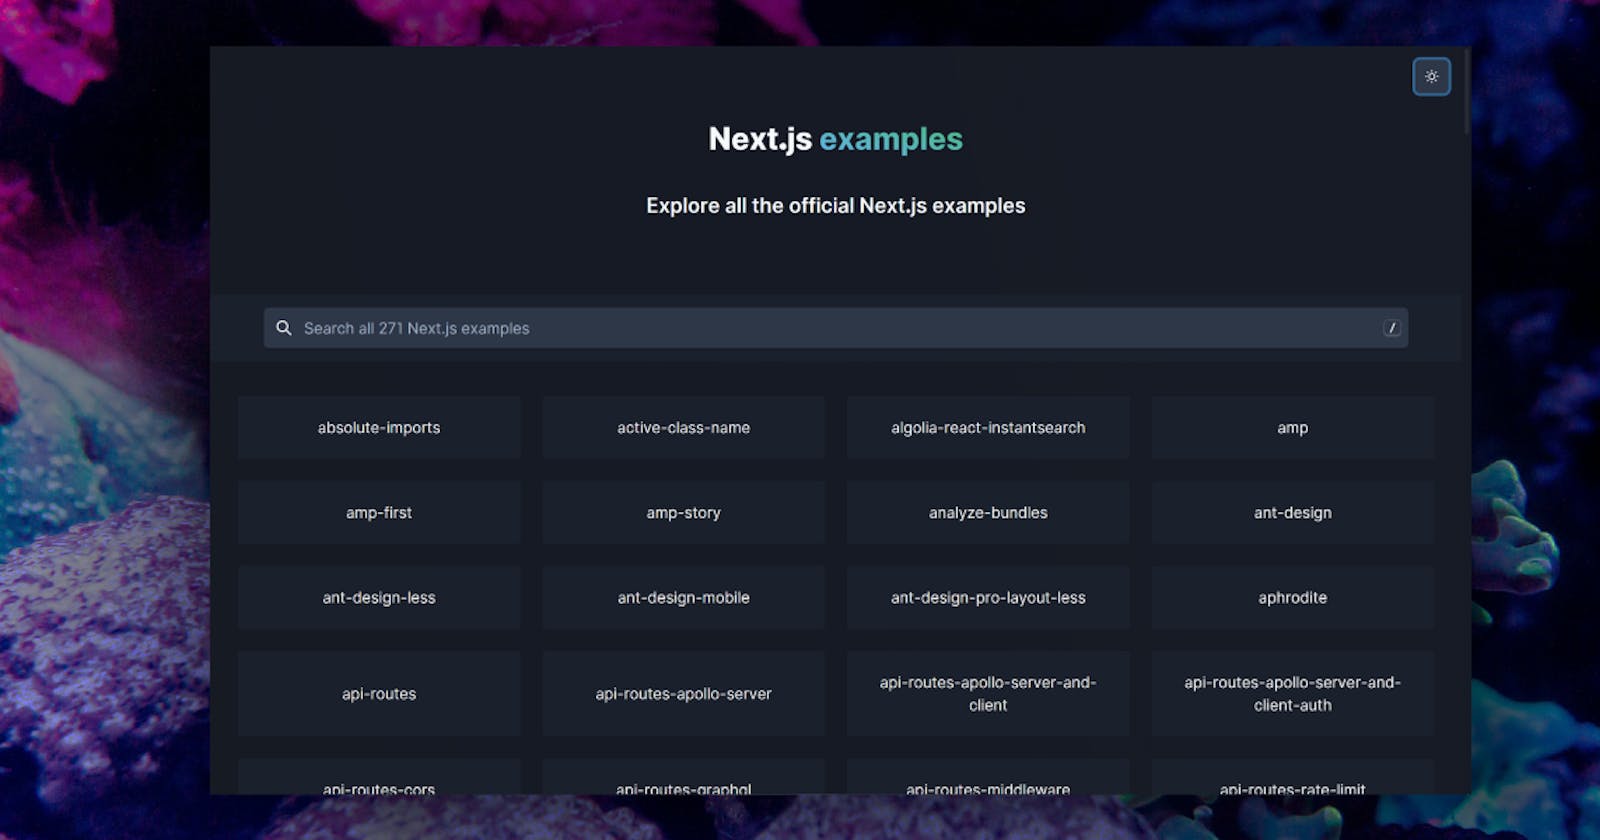 Building "Next.js Examples" from the Next.js GitHub repo